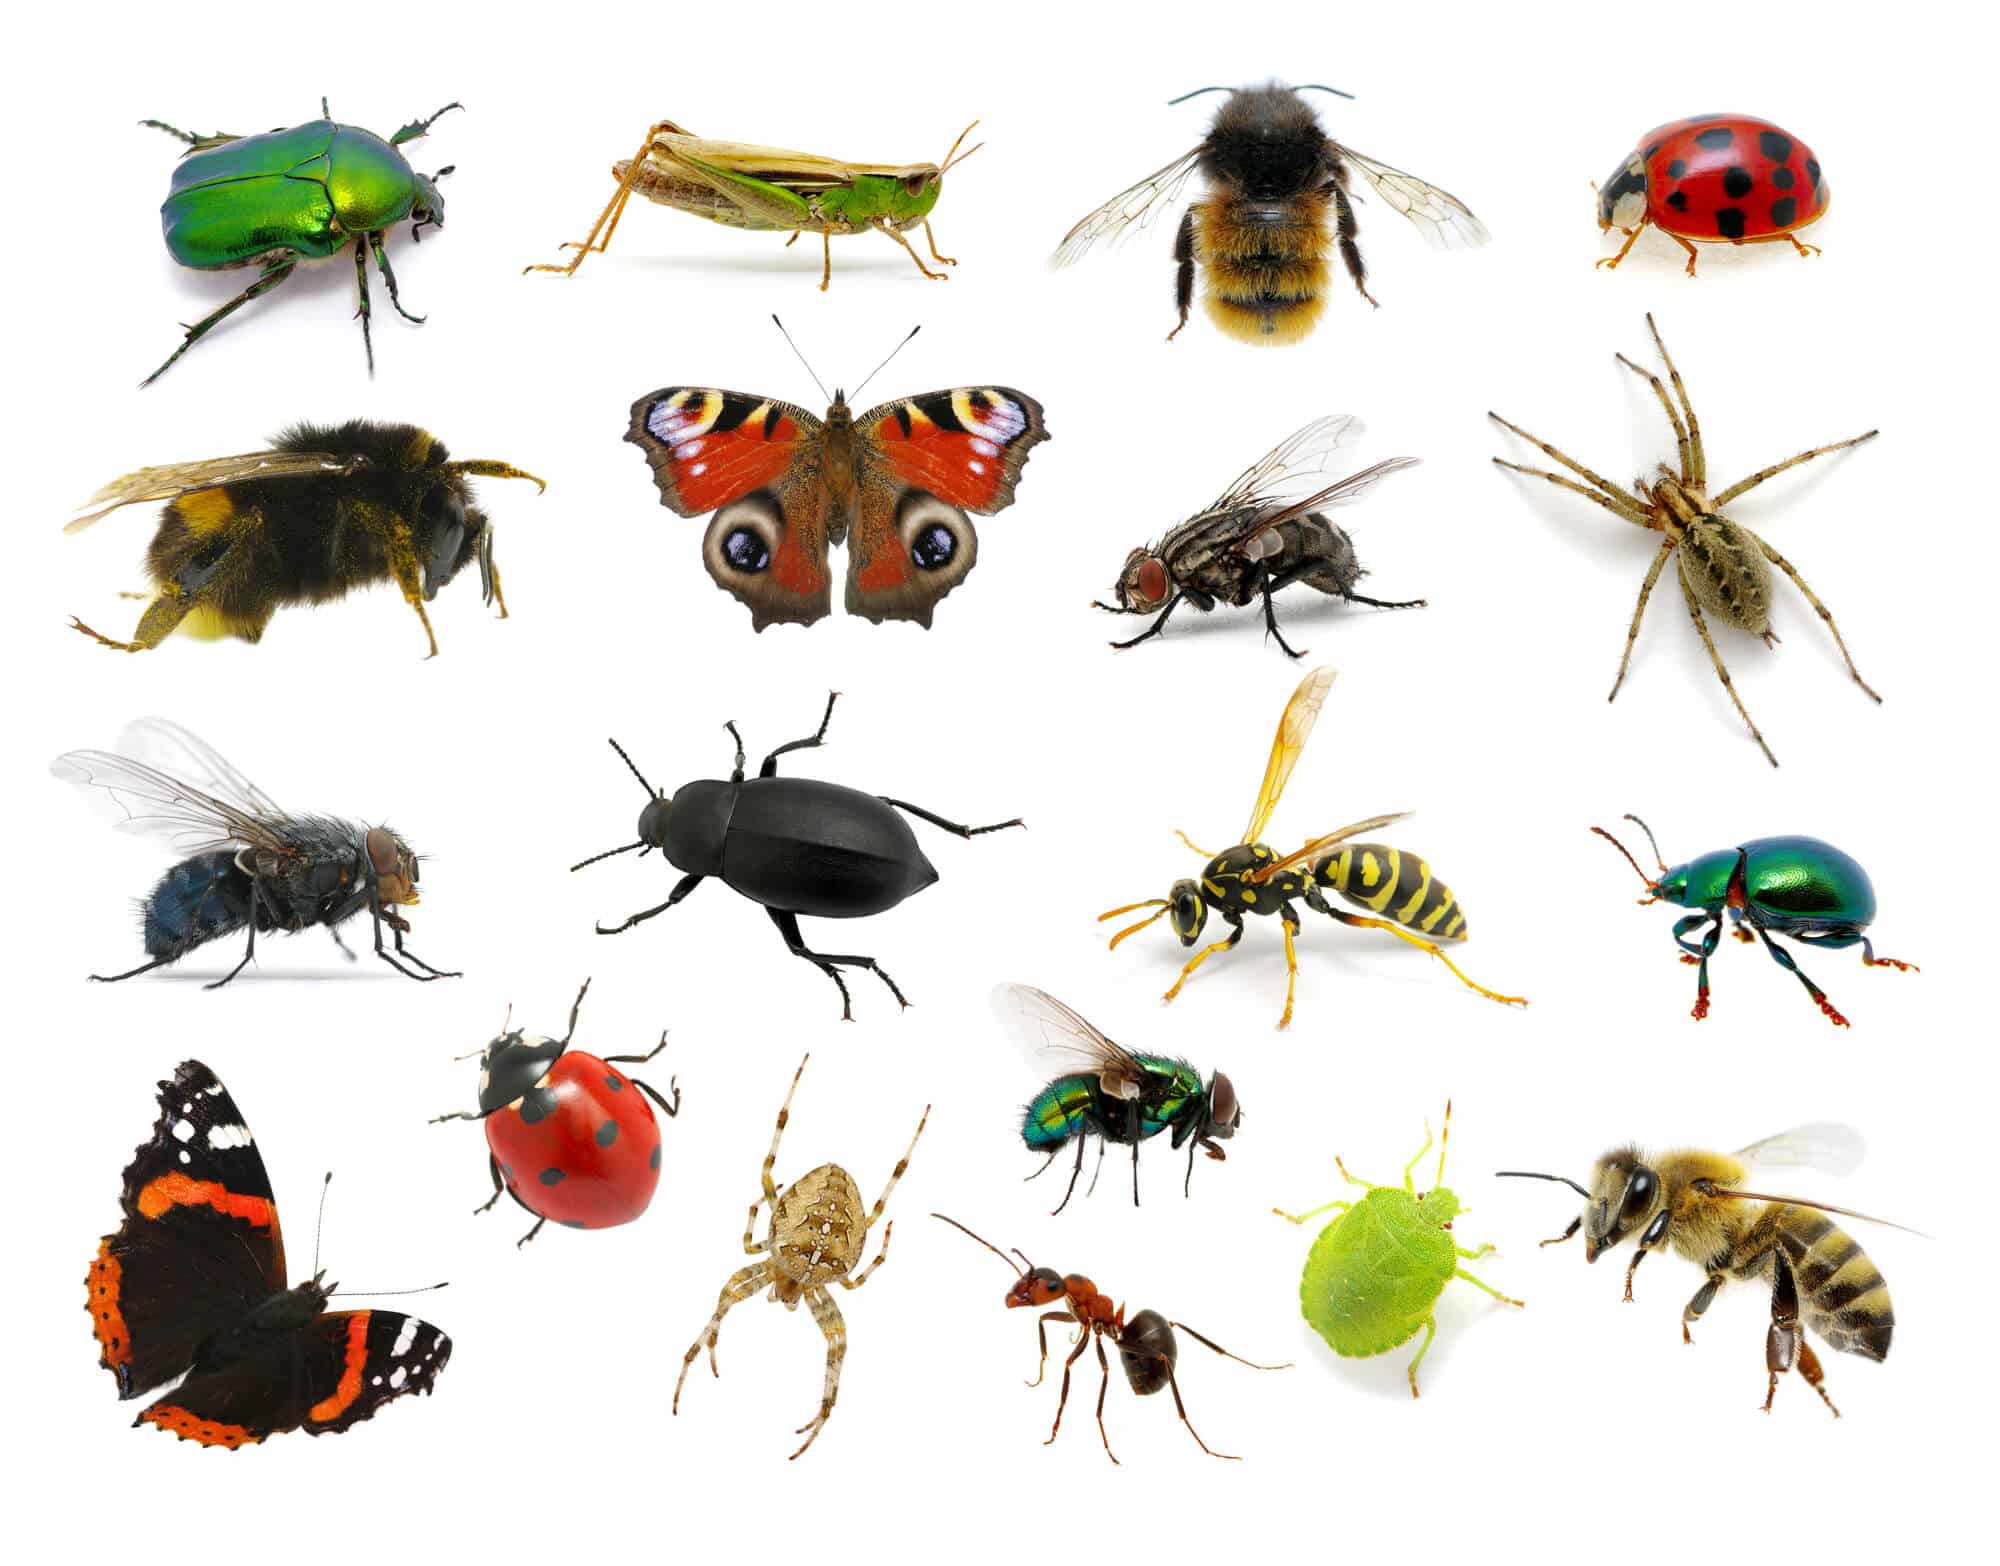 Different types of insects. Illustration: depositphotos.com